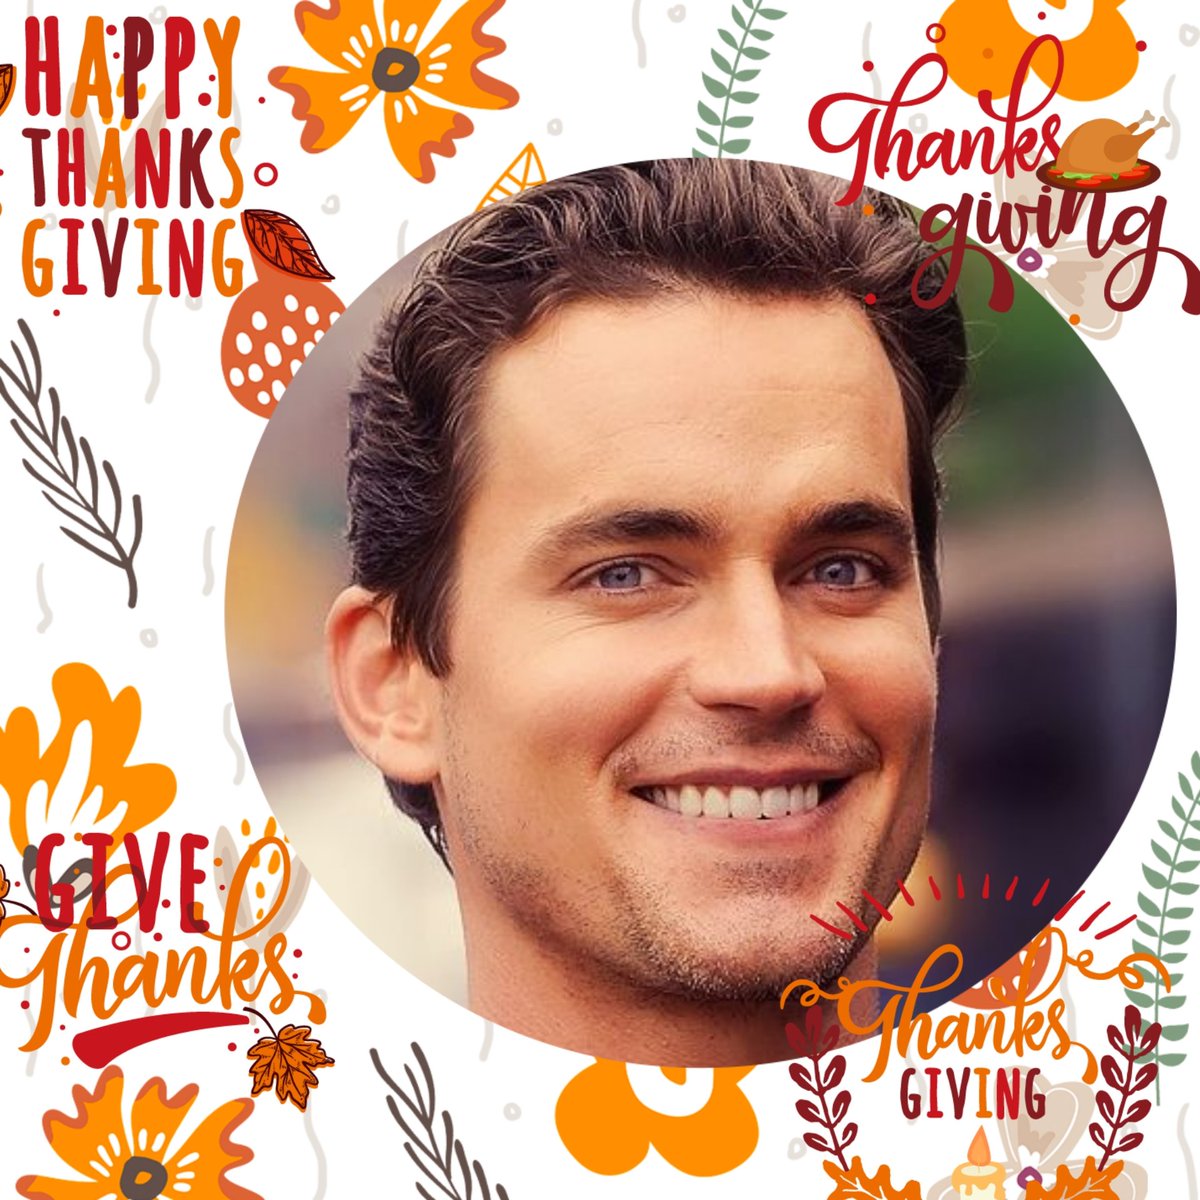 Happy Thanksgiving Matt have a fabulous time celebrating with your family and friends ❤🧡❤🧡❤🏴󠁧󠁢󠁷󠁬󠁳󠁿❤🇺🇸 thank you for keeping me entertained by your extraordinary talented acting skills from #WelshMattBomerfan #Thanksgiving2022 #mattbomer